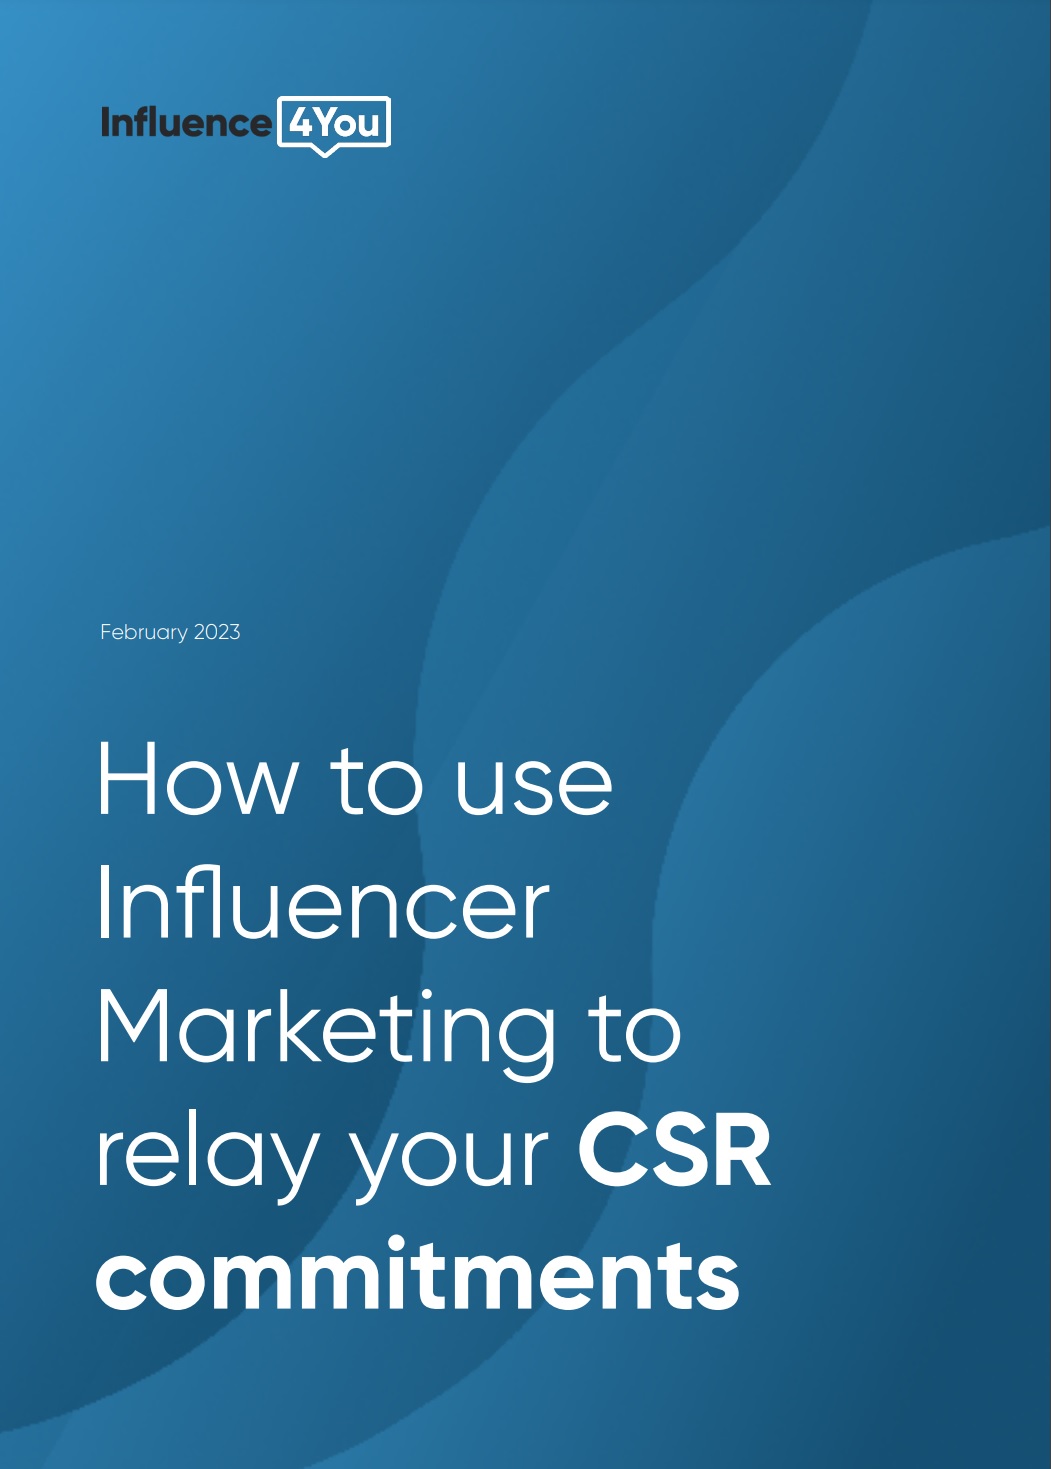 Guide How to use Influencer Marketing to relay your CSR (corporate social responsibility) commitments